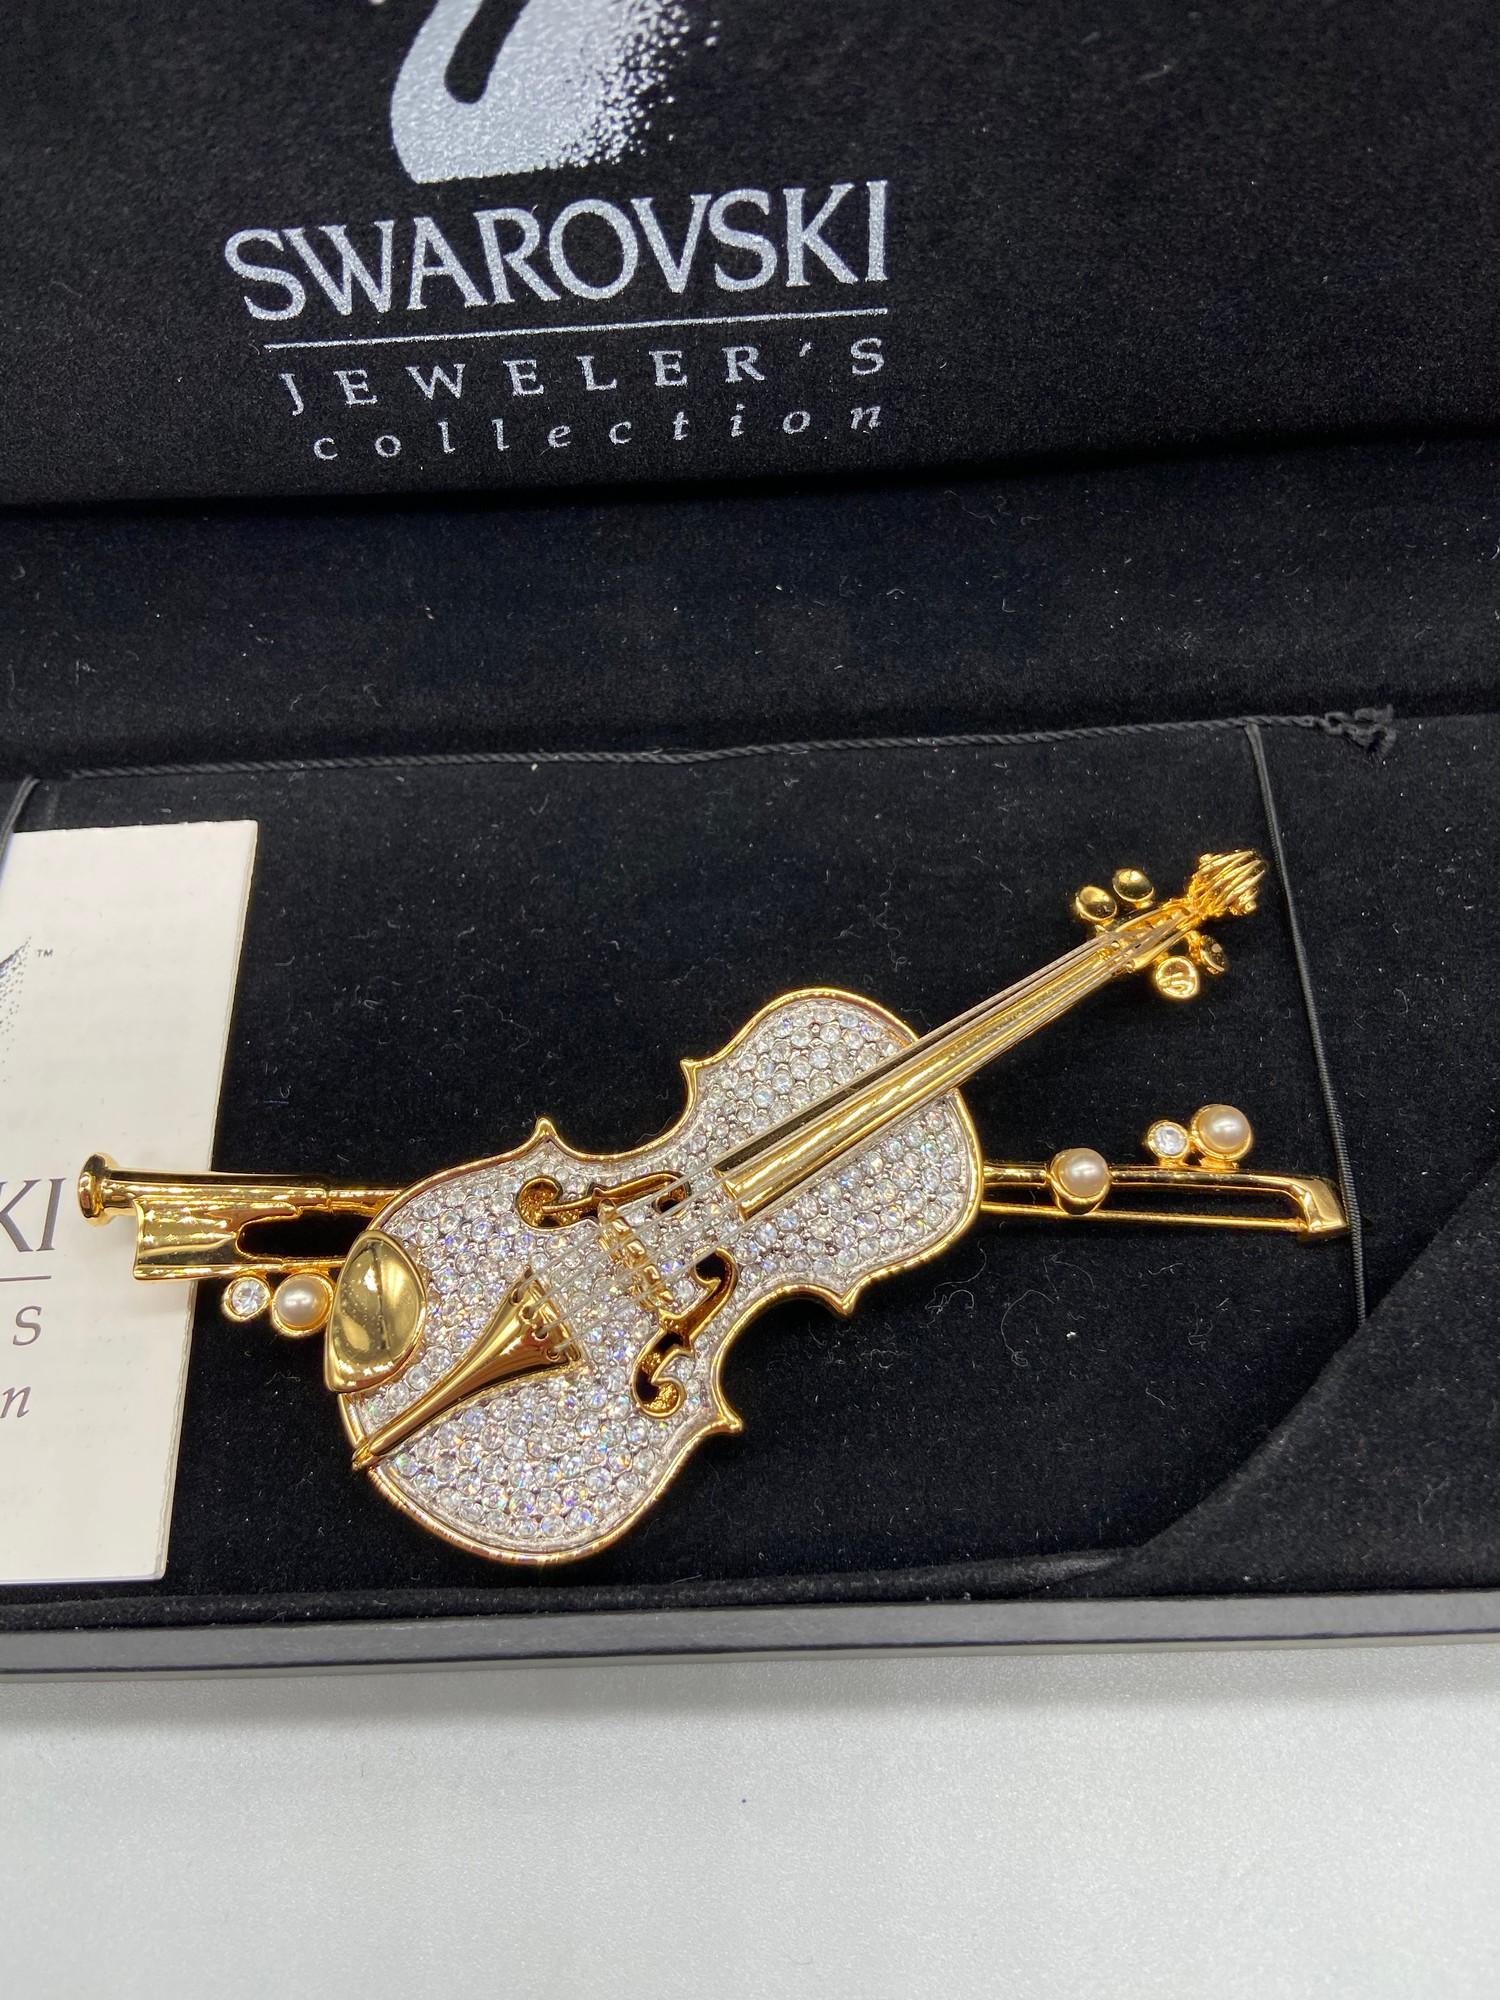 A Lovely example of a Swarovski brooch in the shape of a violin and bow. Comes with a box. - Image 2 of 4